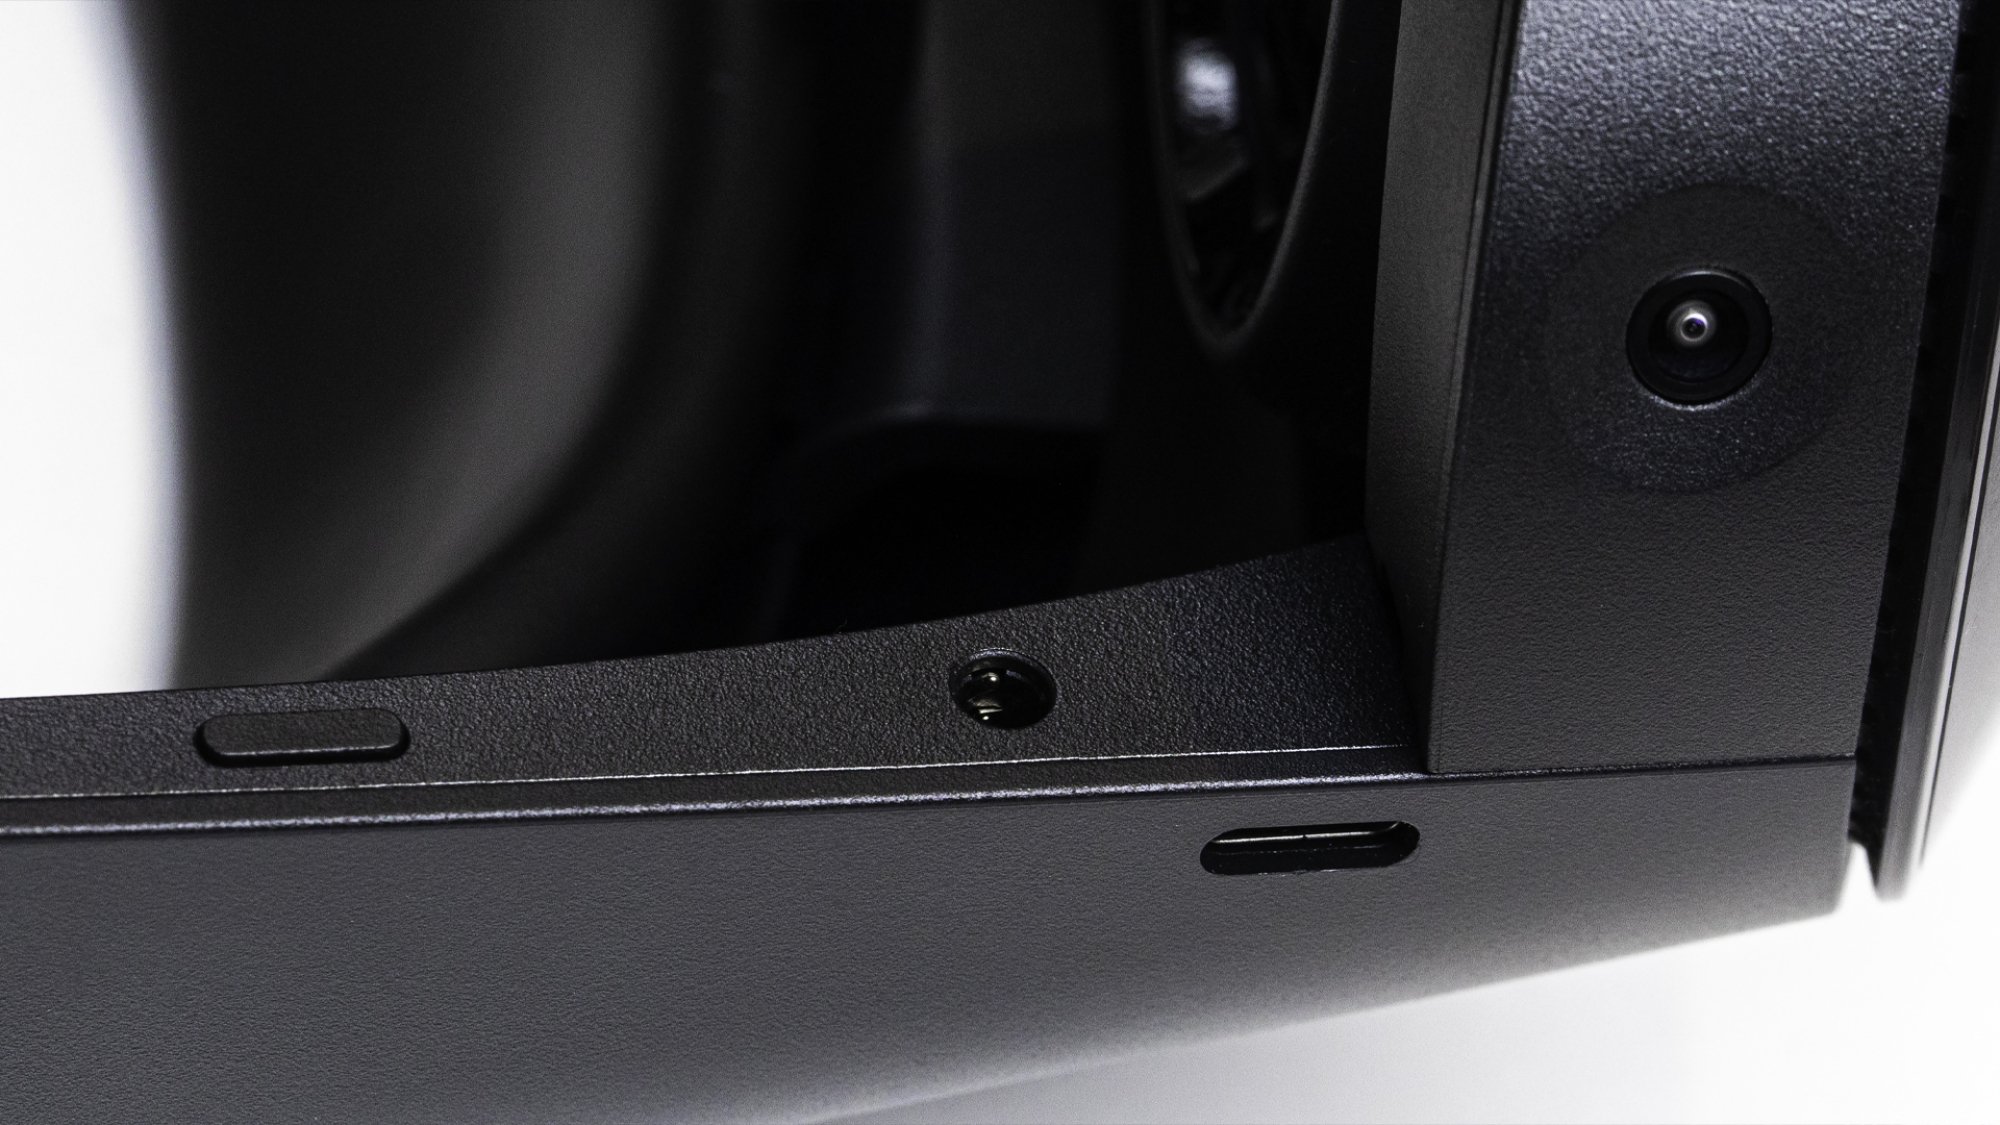 The underside of the left side of the headset which is matte black. A USB-C port, power button, and headphone jack are visible